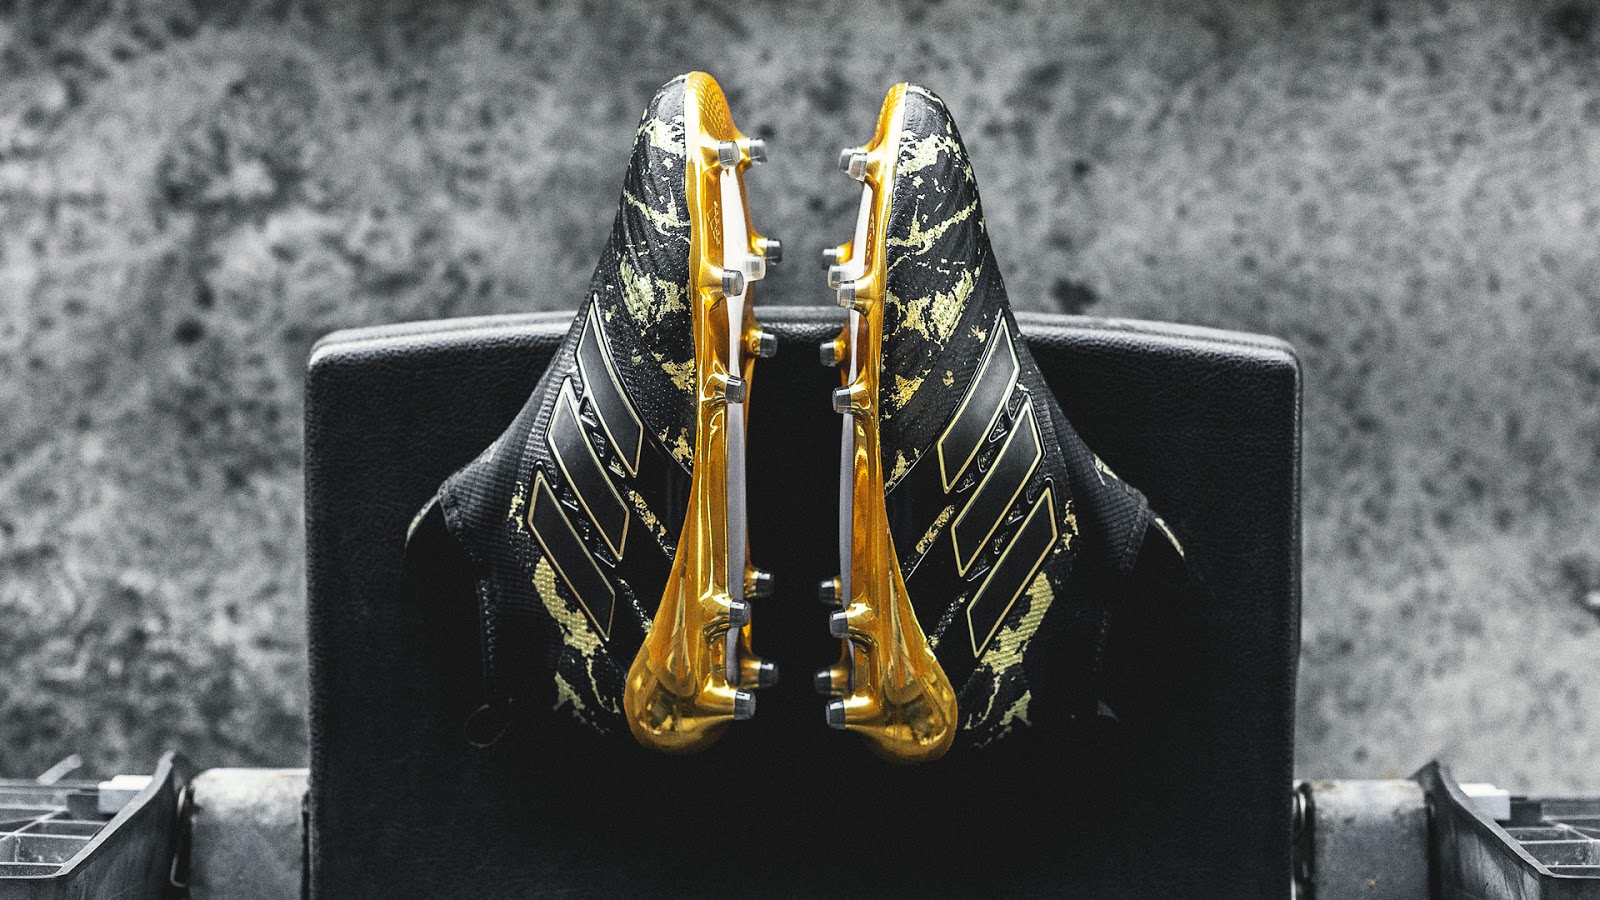 Paul Pogba PP Collection Season 3 Released - Soccer Cleats 101